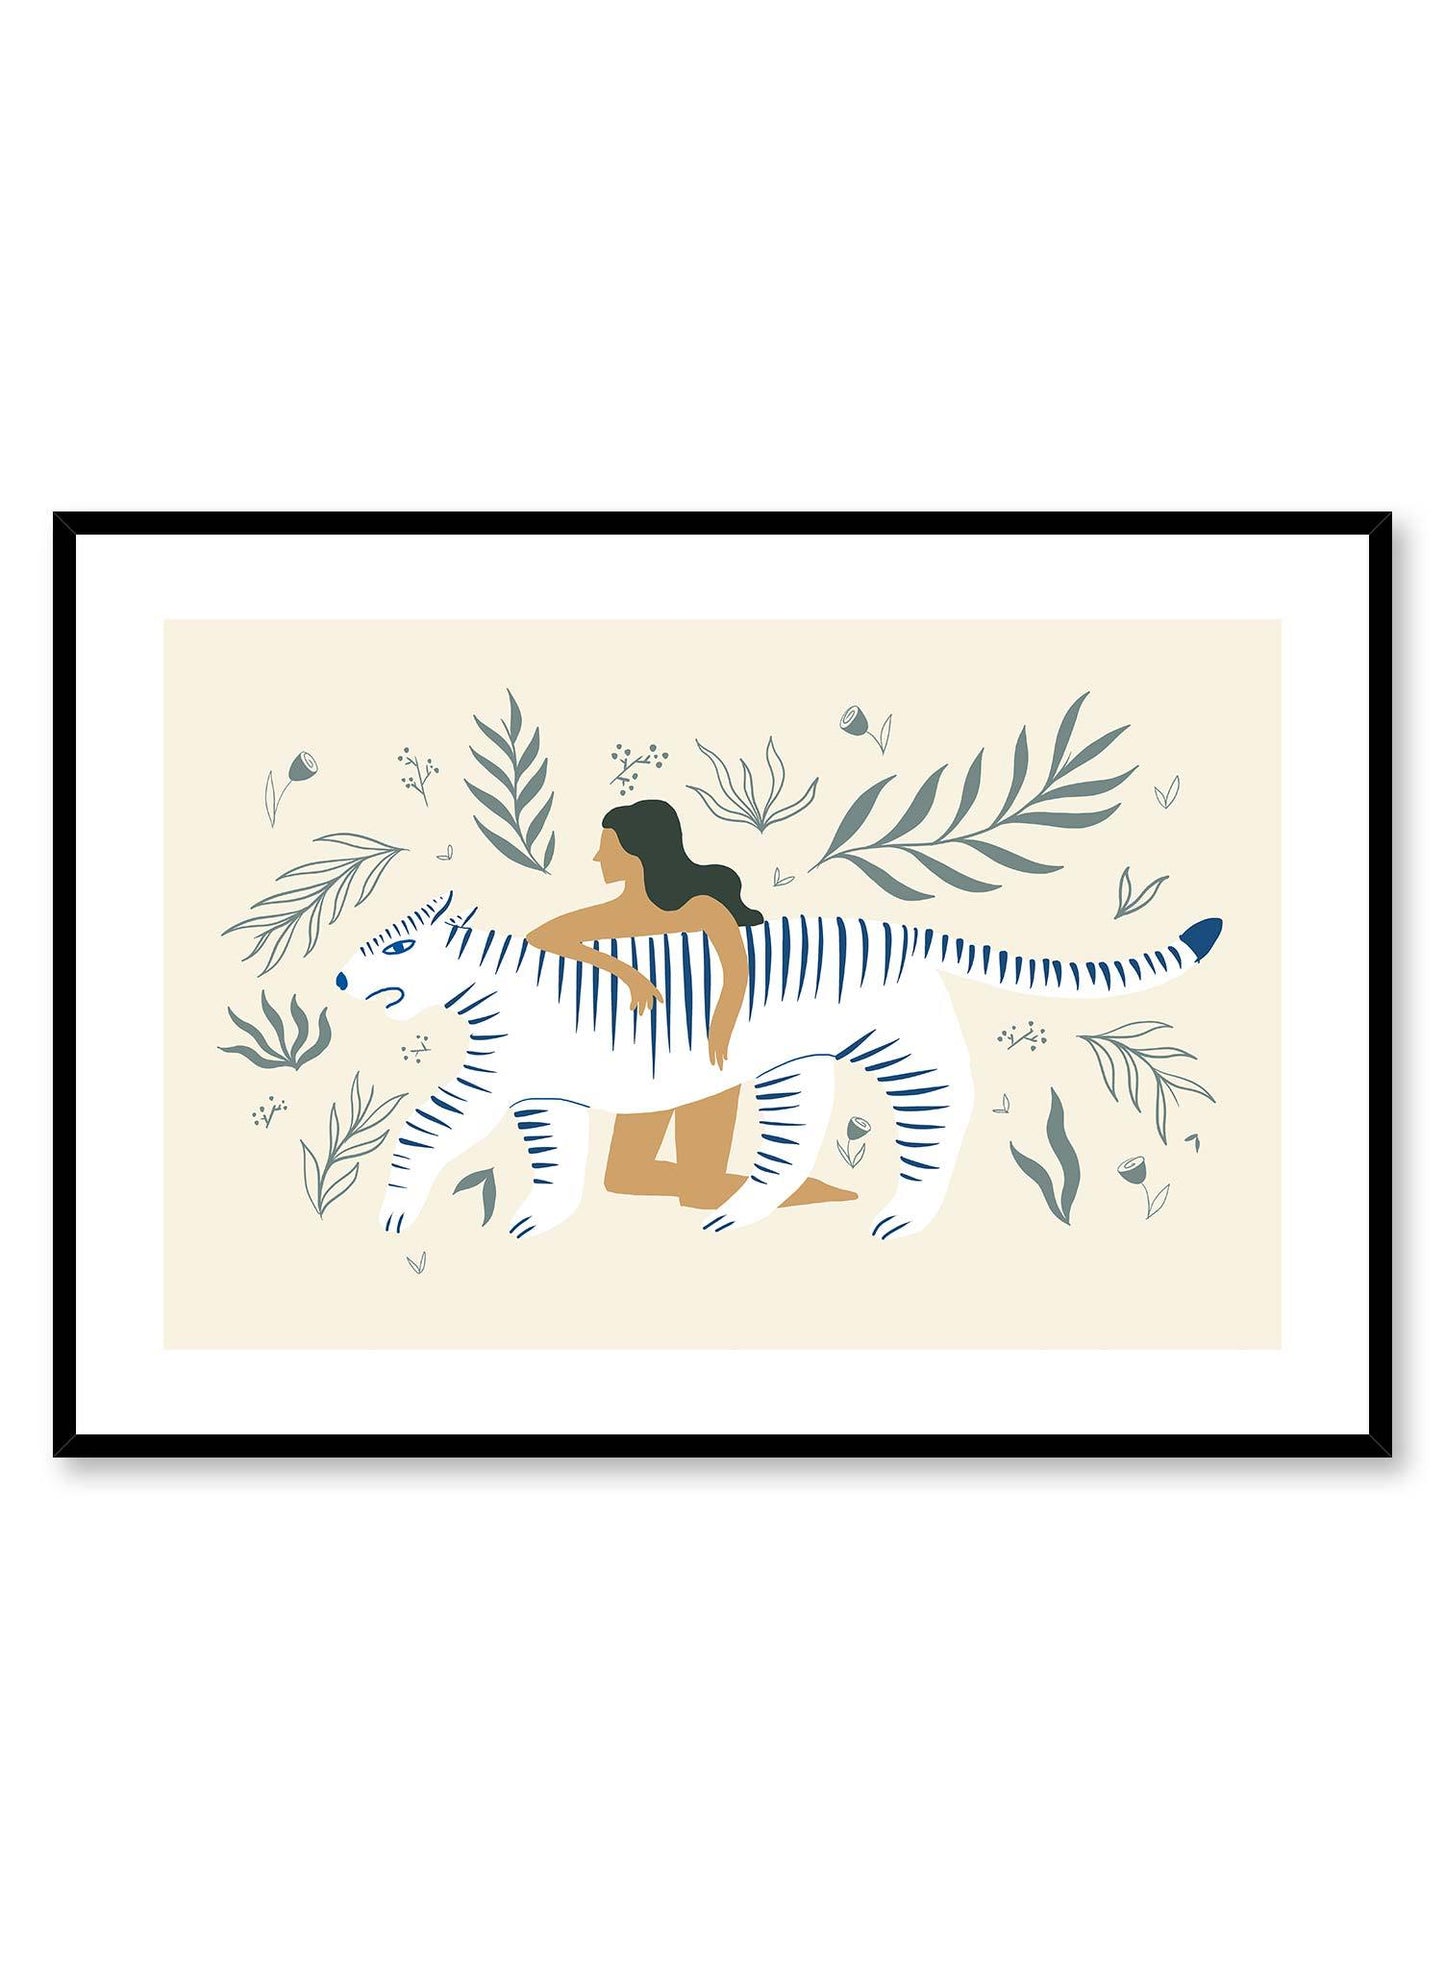 Power Alliance is a minimalist illustration of a woman kneeling while embracing a white striped tiger with a plant-filled background by Opposite Wall.